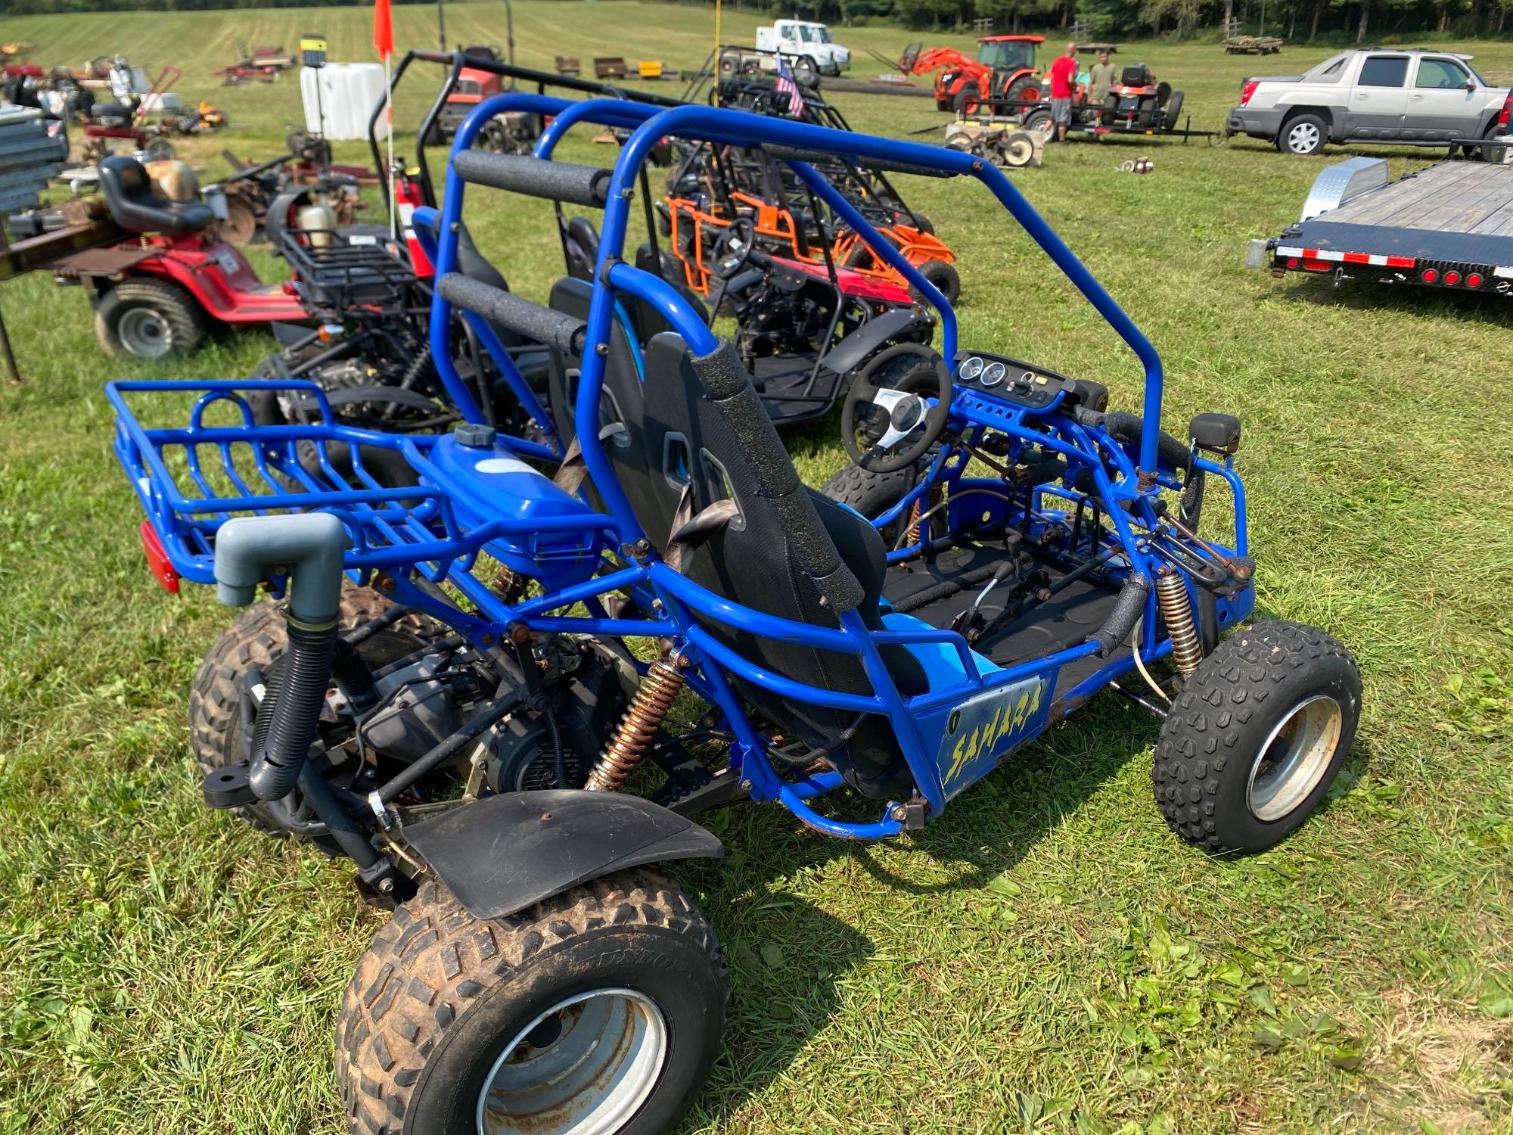 Image for 2 Seater Go Kart 150, per seller been sitting and does not run